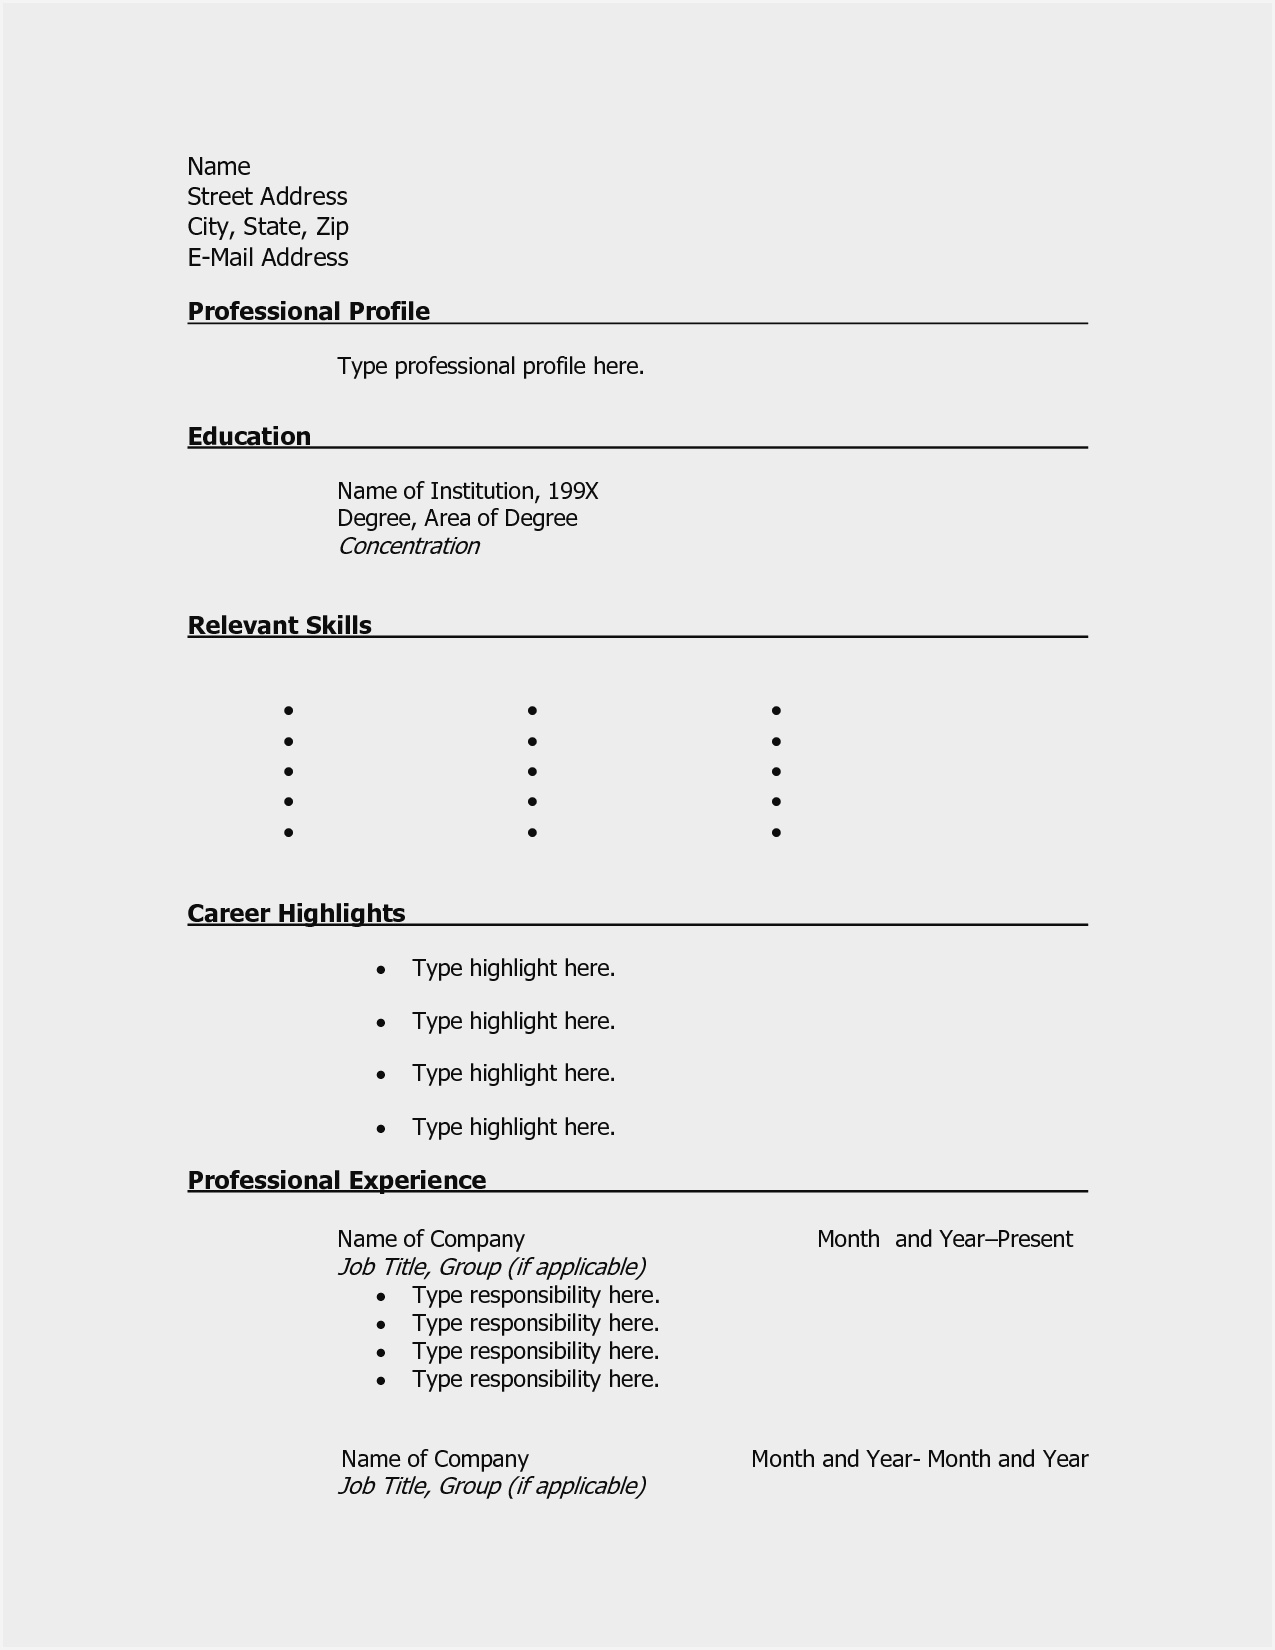 Download Blank Resume Templates – Resume : Resume Sample #7157 Within Free Blank Cv Template Download